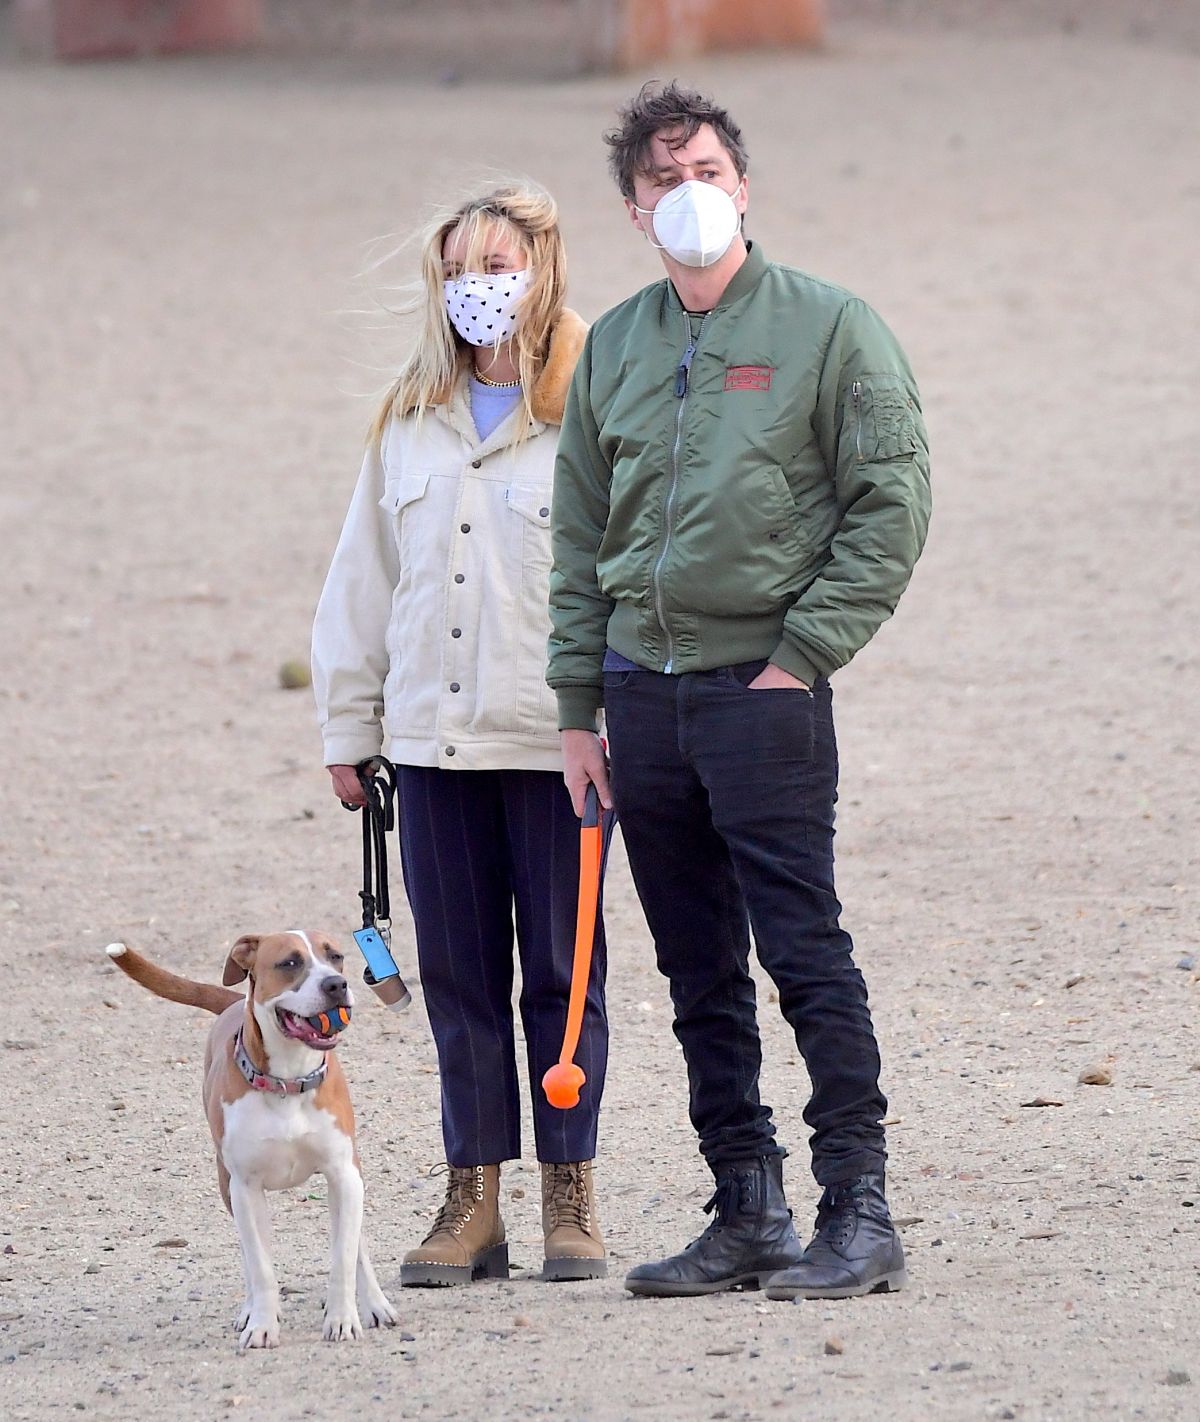 florence-pugh-and-zach-braff-out-at-a-dog-park-in-los-angeles-12-14-2020-3.jpg